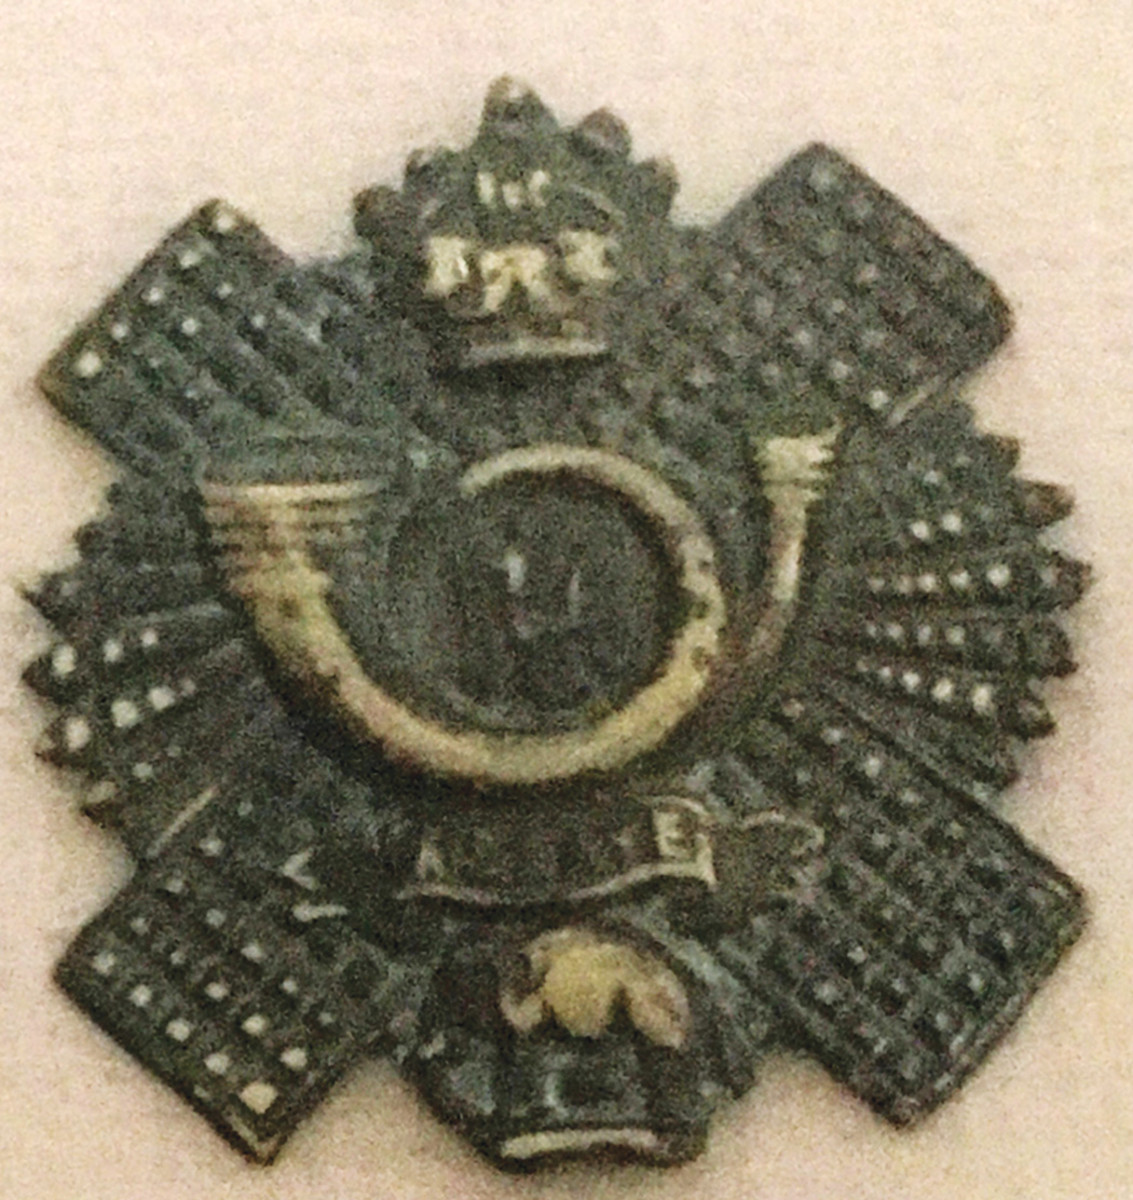 A Highland Light Infantry cap badge found in a British position.